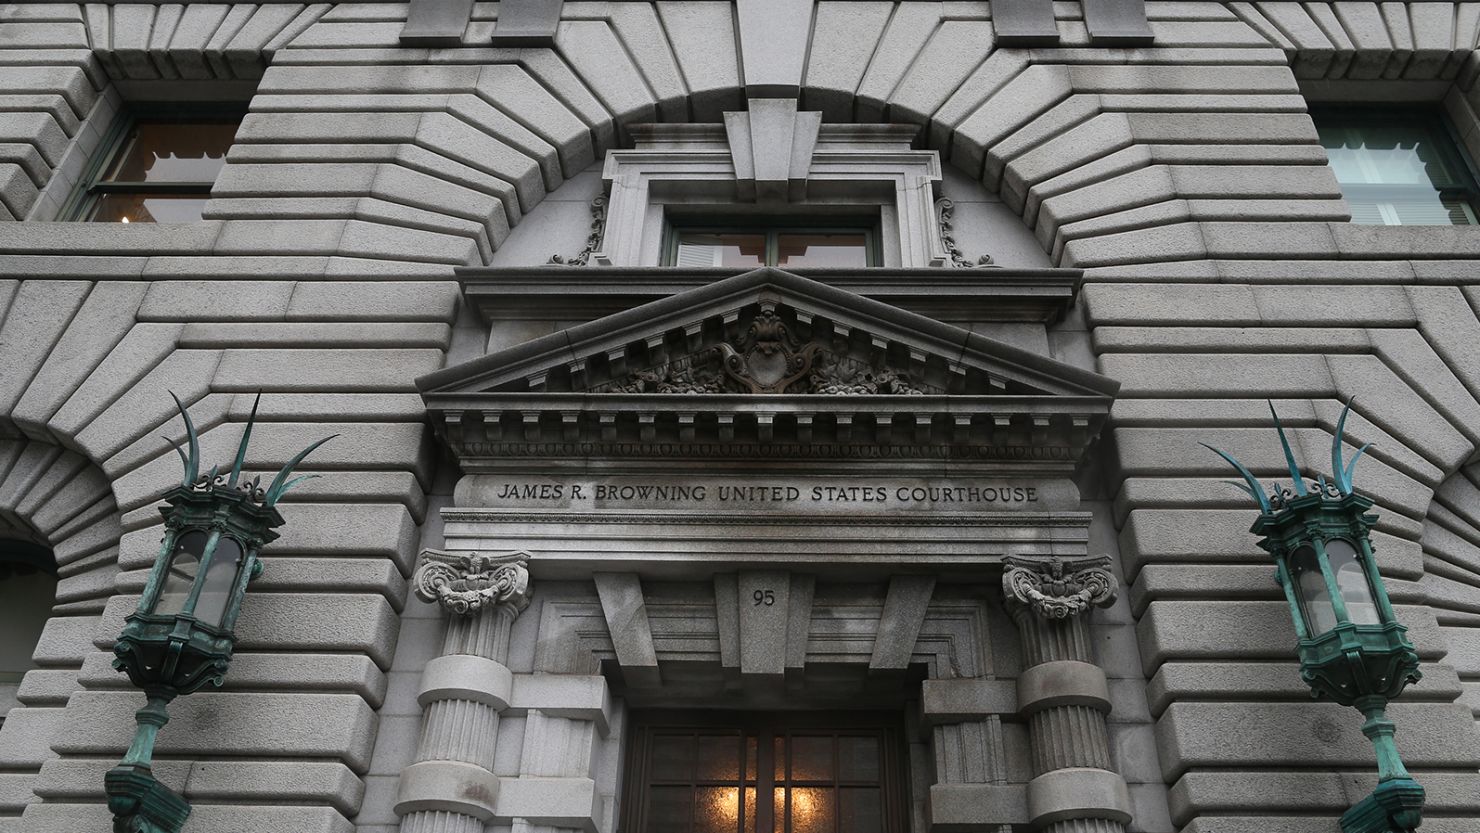 The U.S. Court of Appeals for the 9th Circuit, located in San Francisco, is investigating a misconduct allegation into a federal judge in Southern California.